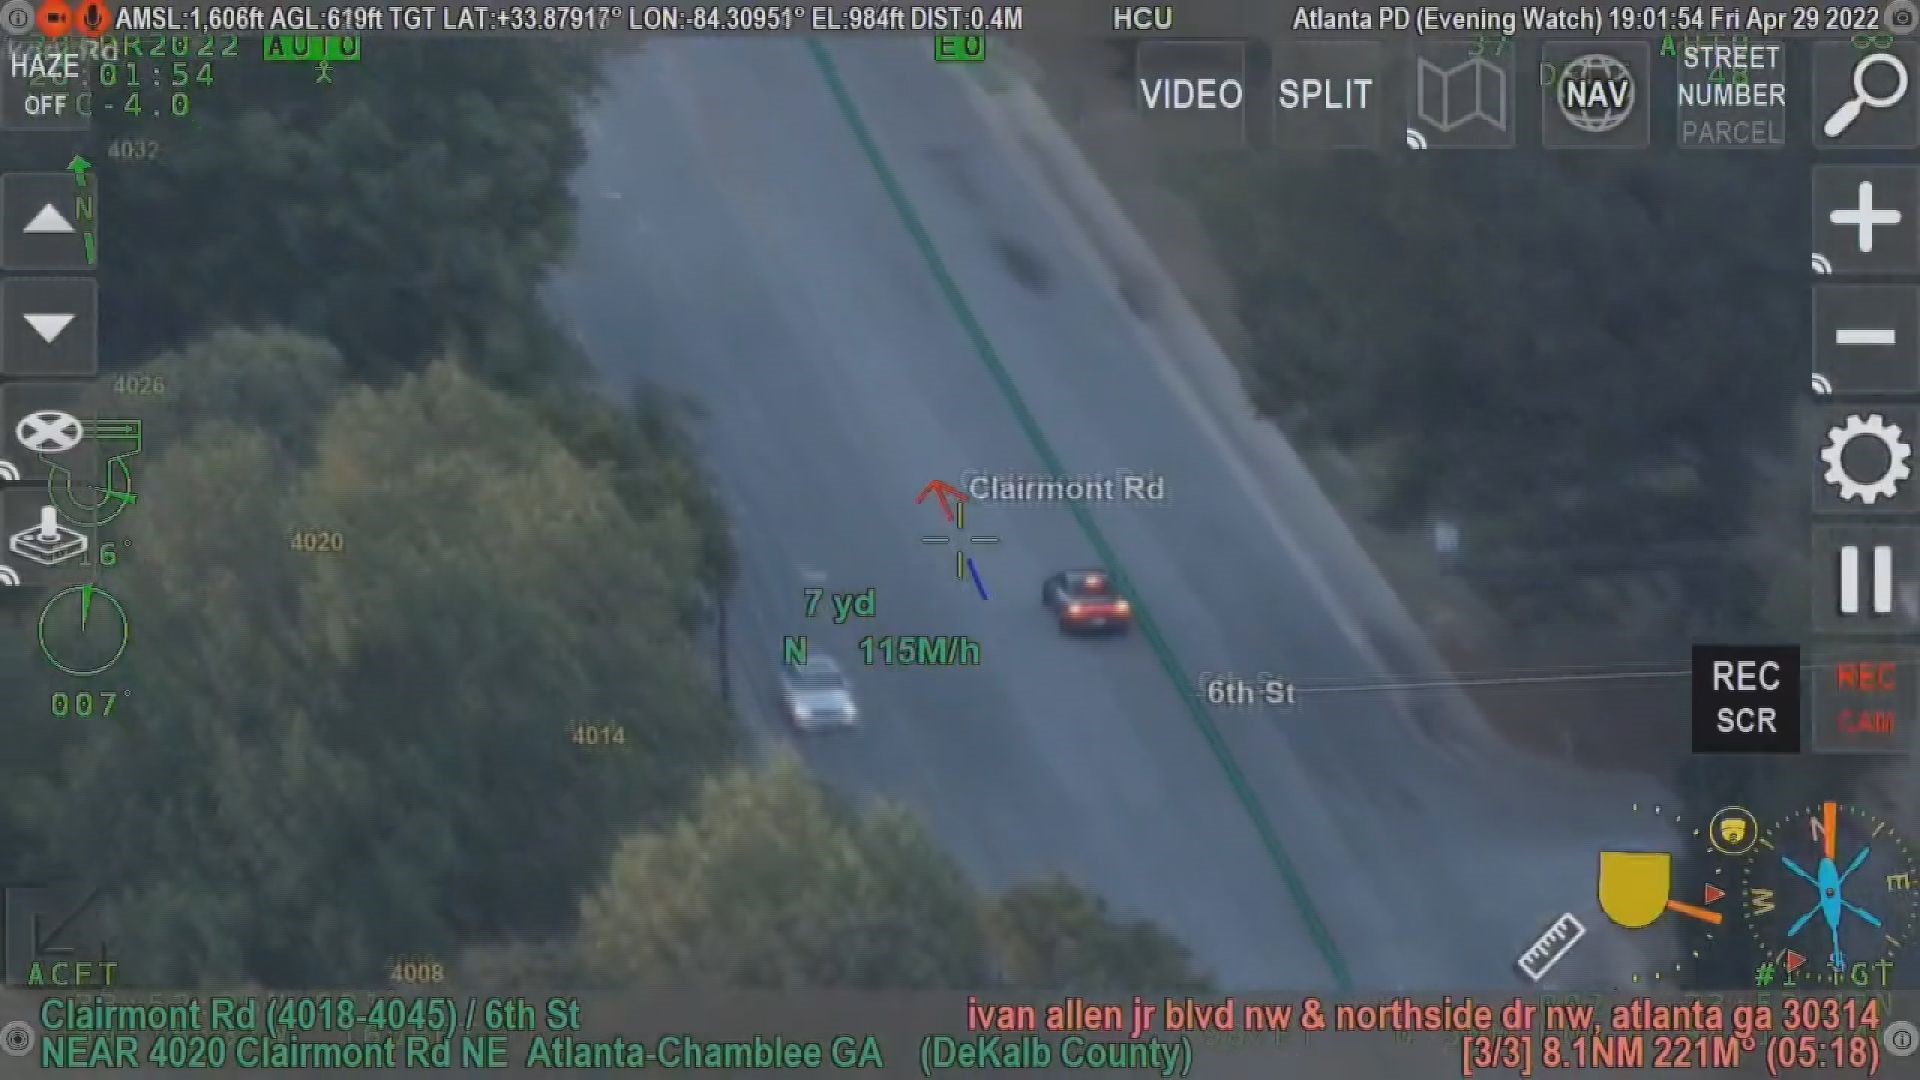 Atlanta Police released video of their Air Unit in action as they teamed up with Georgia State Patrol to stop alleged car thieves who led authorities on a chase.